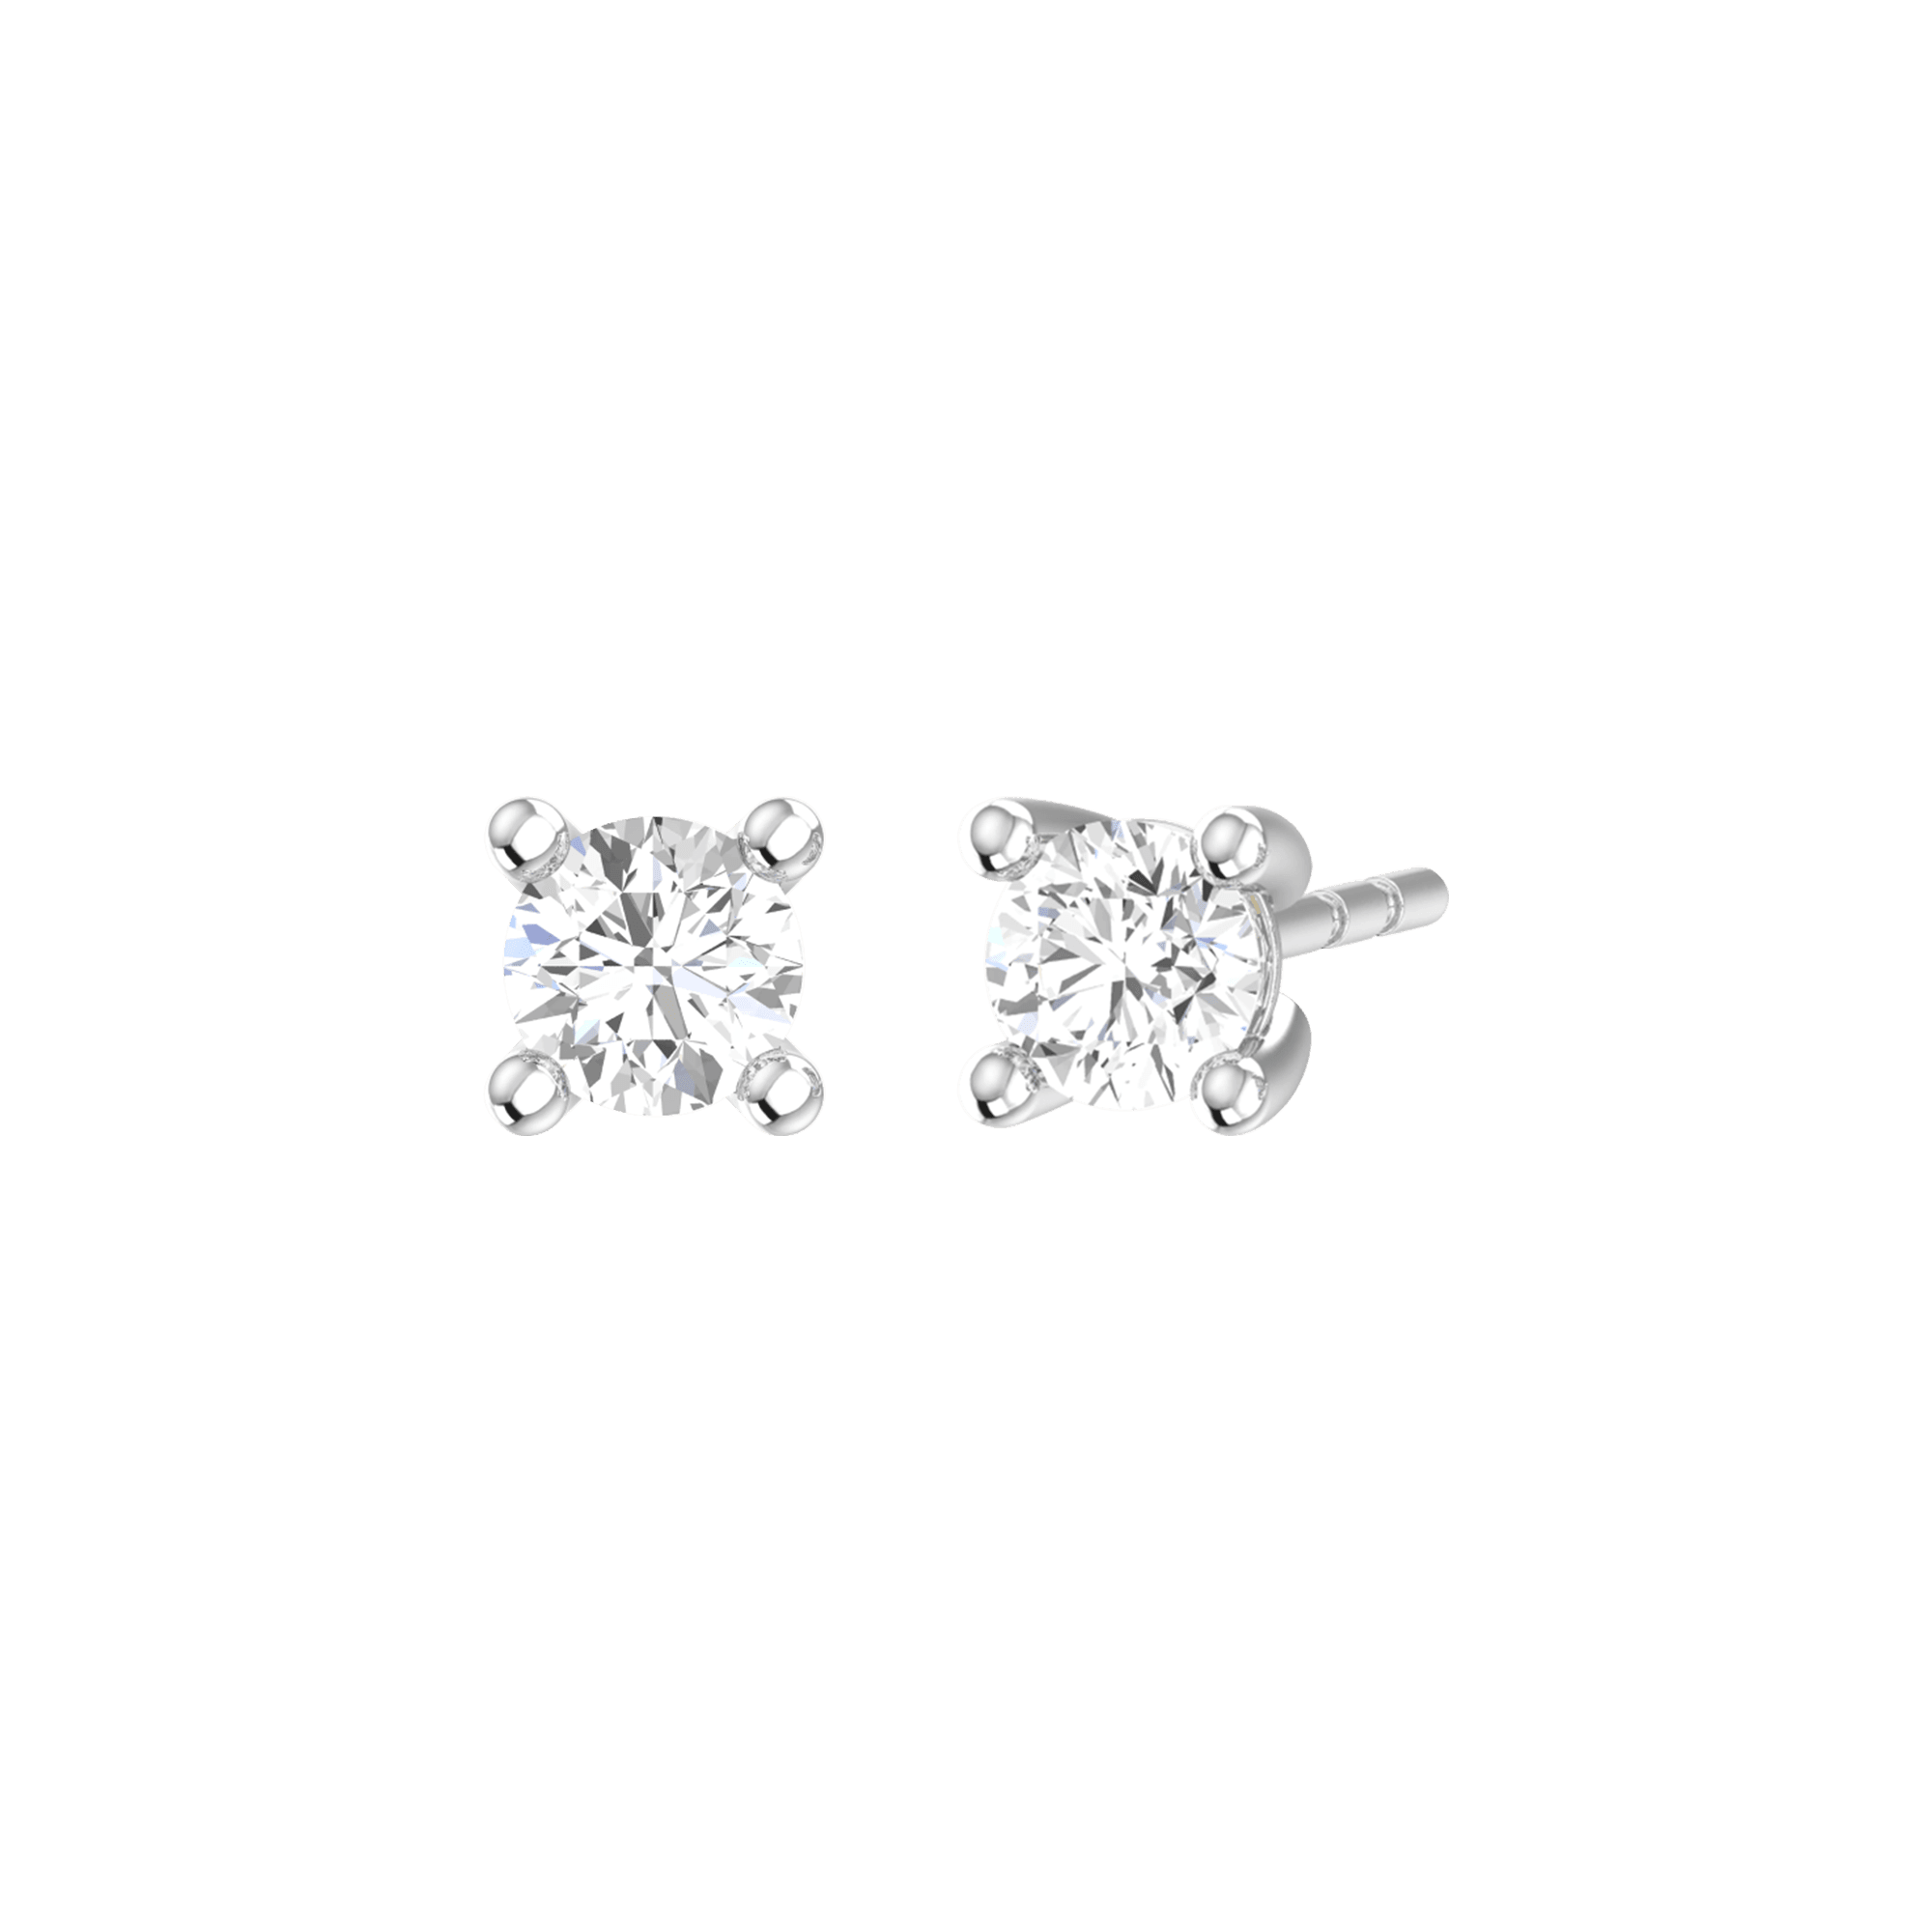 18K Gold Lab-Grown Diamond Solitaire Stud Earrings | 18K white gold / Pair (0.4 carat)  | Jewelry | The Future Rocks